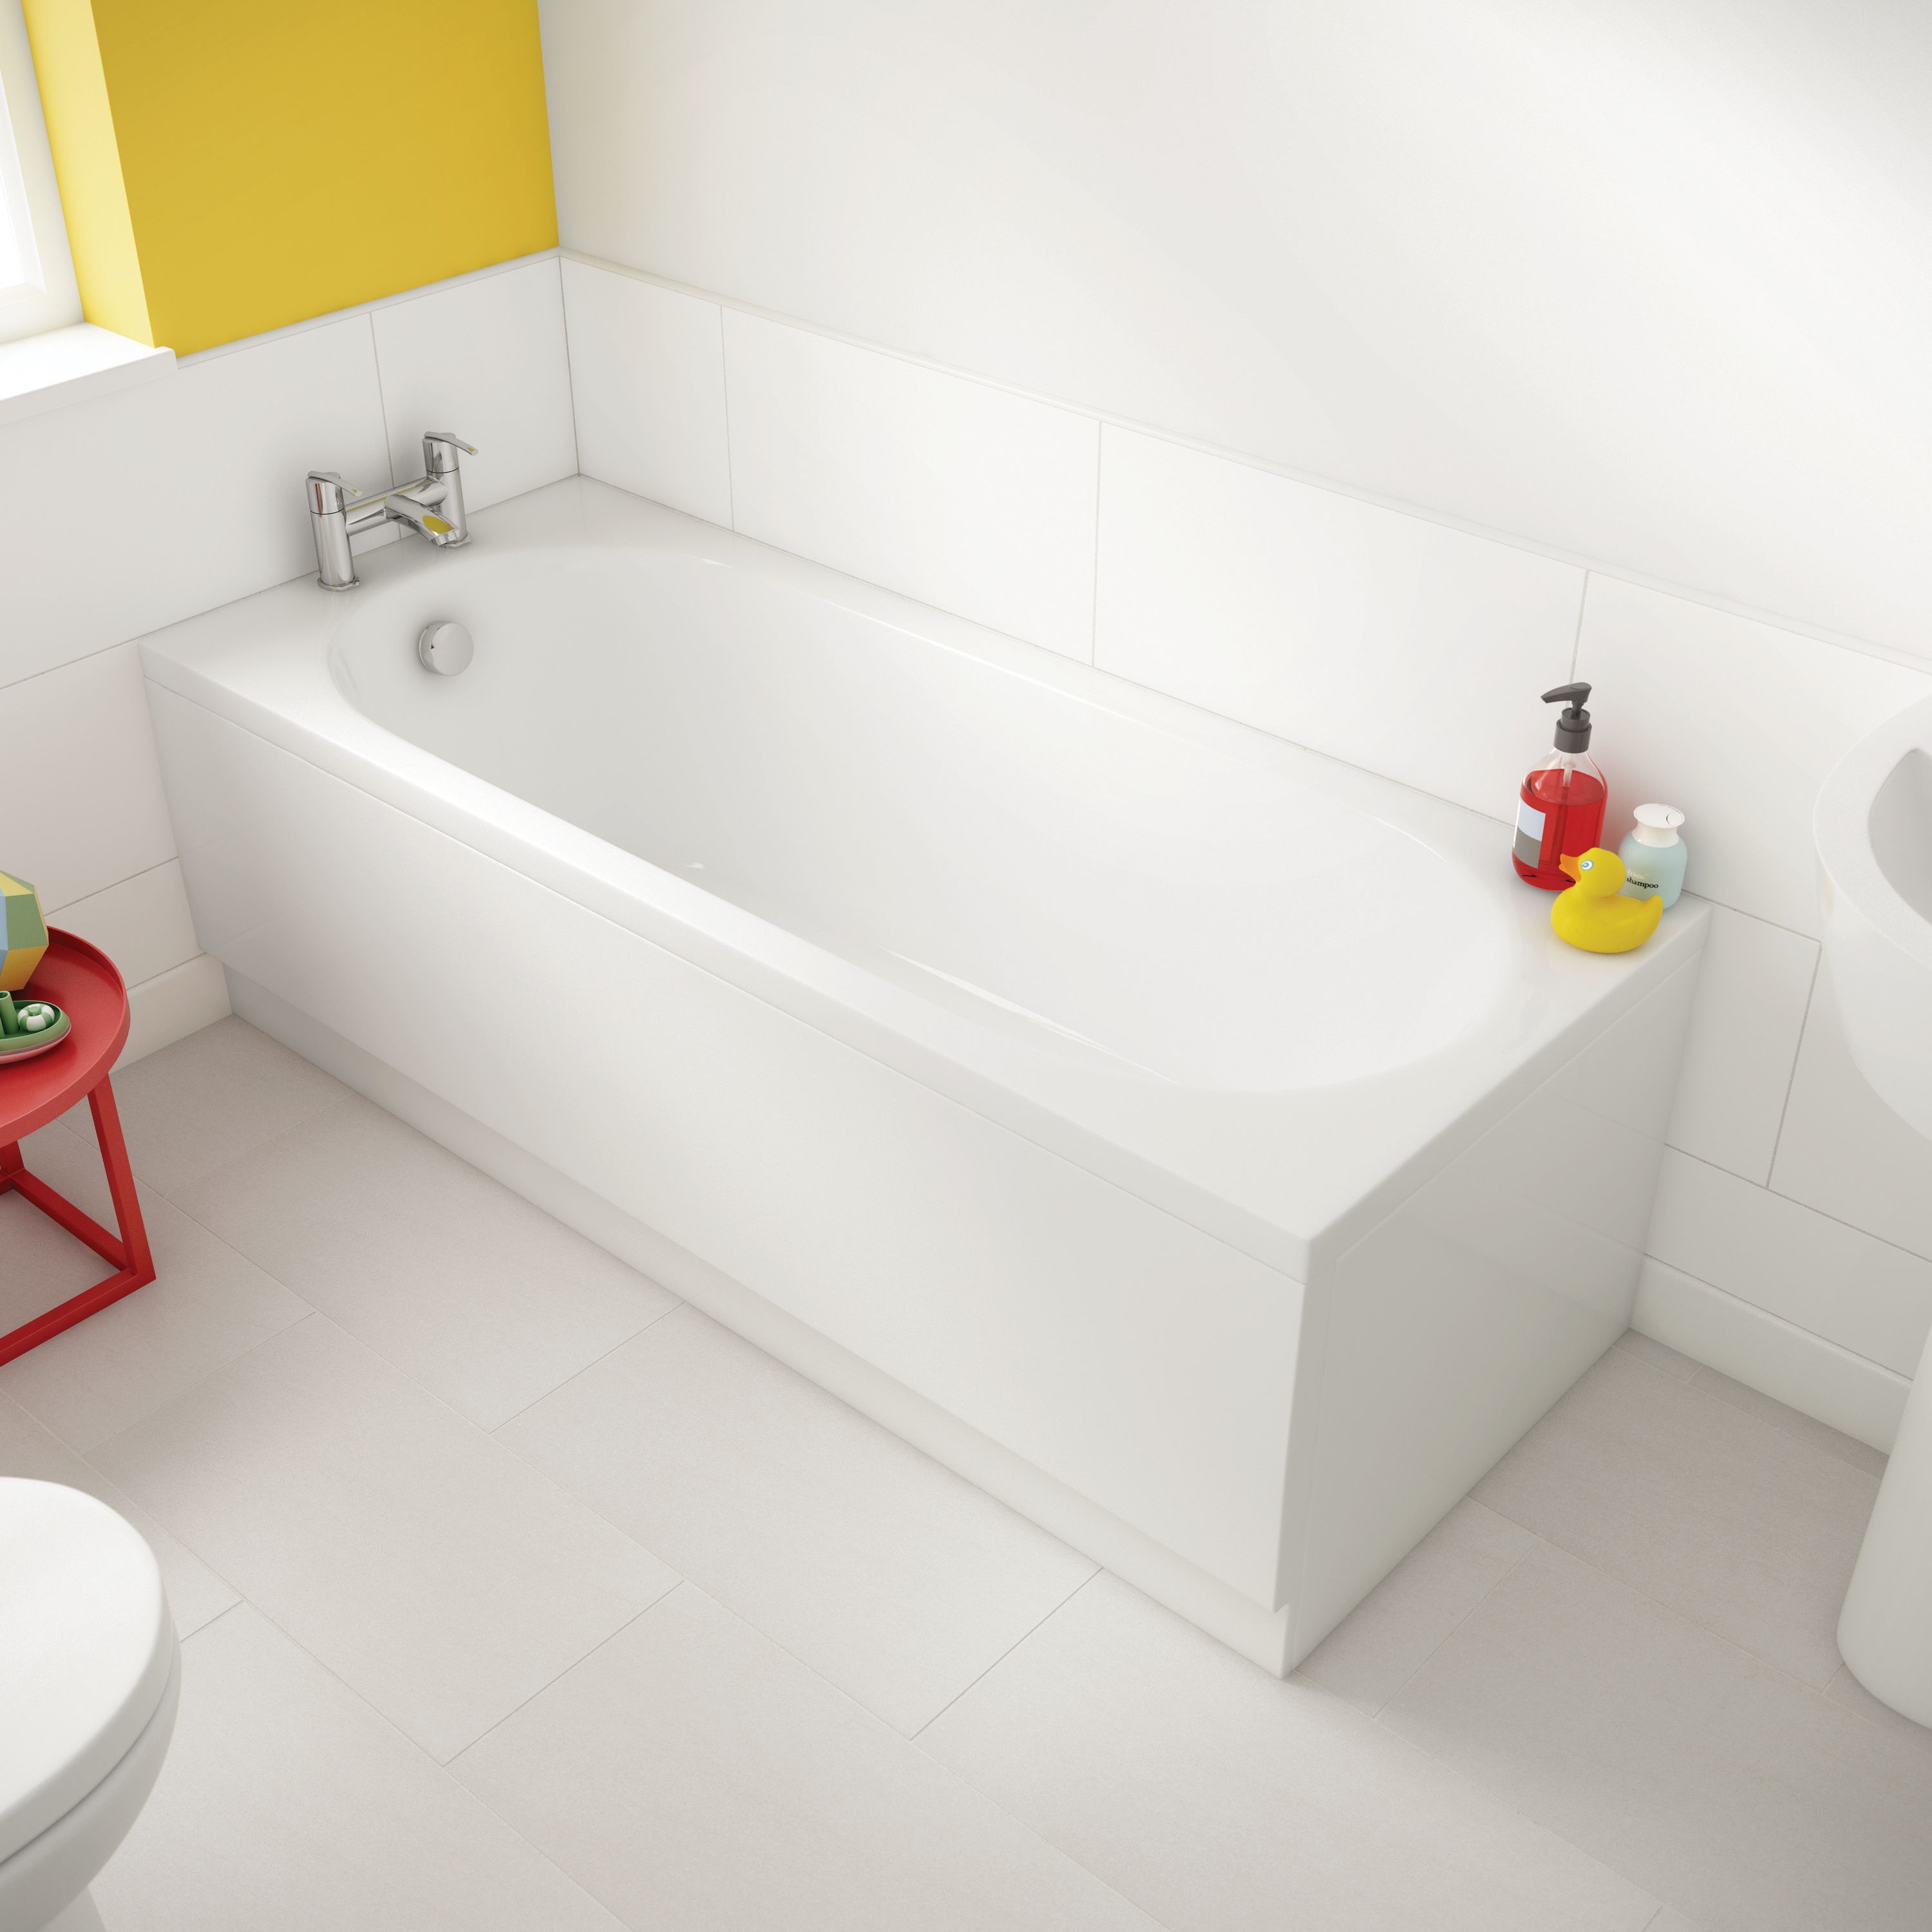 Image of Wickes Forenza Straight Bath - 1500 x 700mm